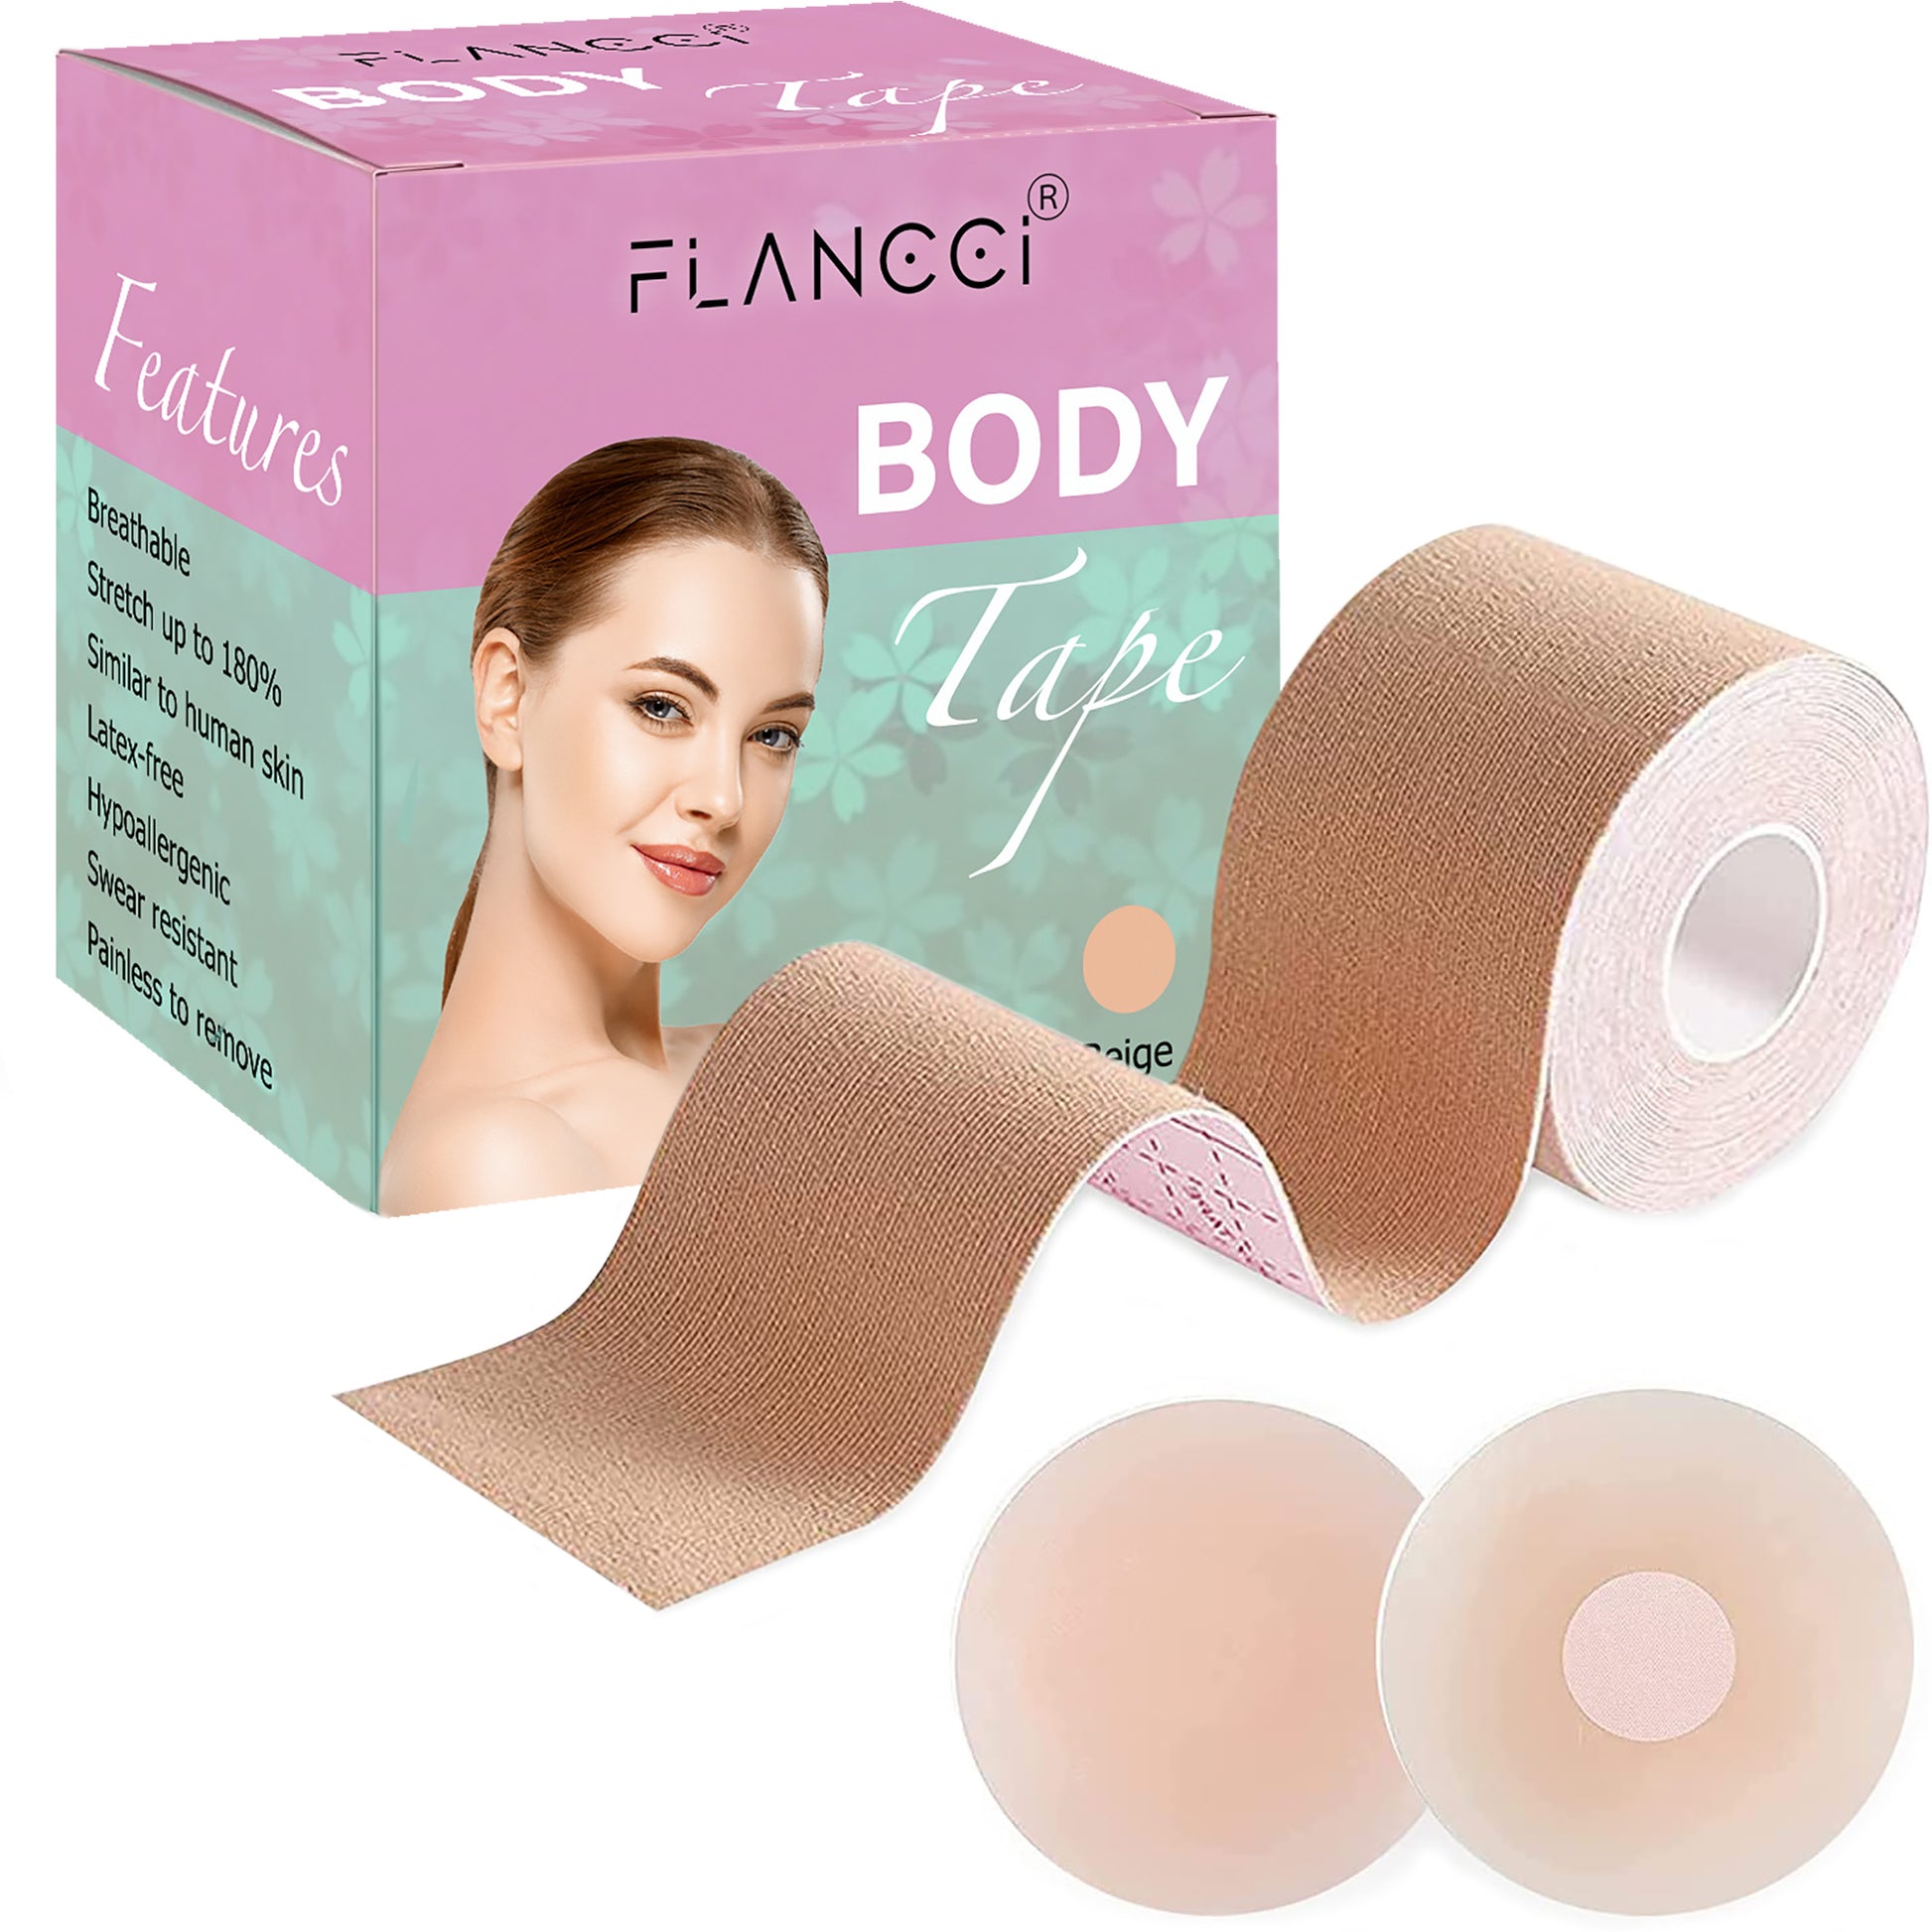 Boobytape for Breast Lift Plus Size Black with 2 pcs Nipple Covers – FLANCCI